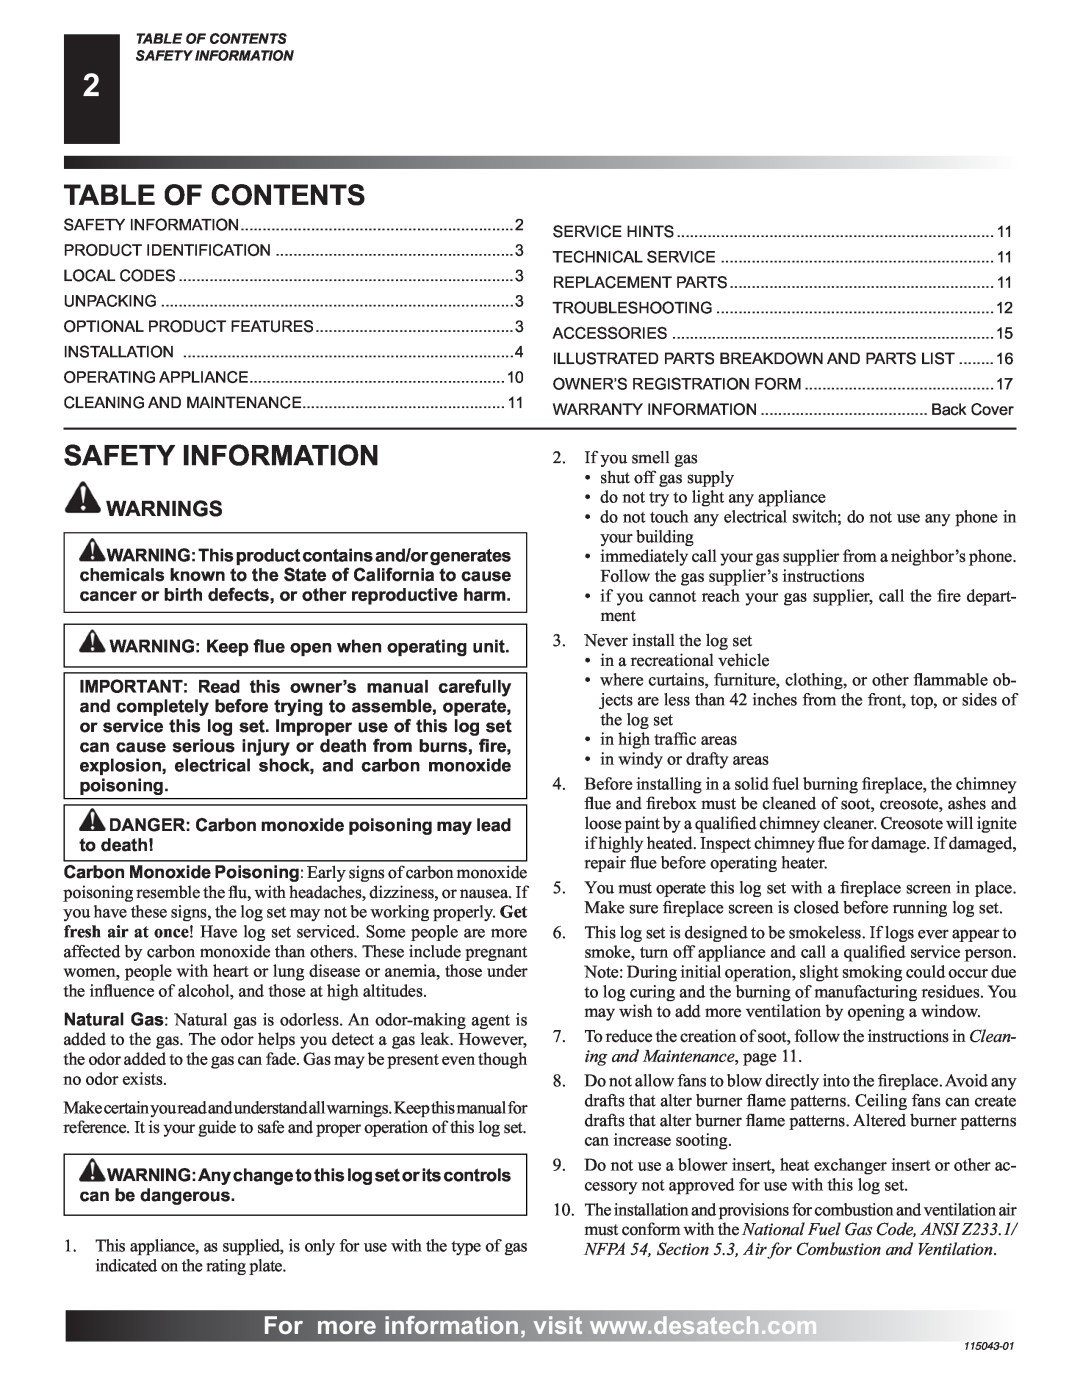 Desa RGA 2-72 Table Of Contents, Safety Information, Warnings, WARNING Keep ﬂue open when operating unit 